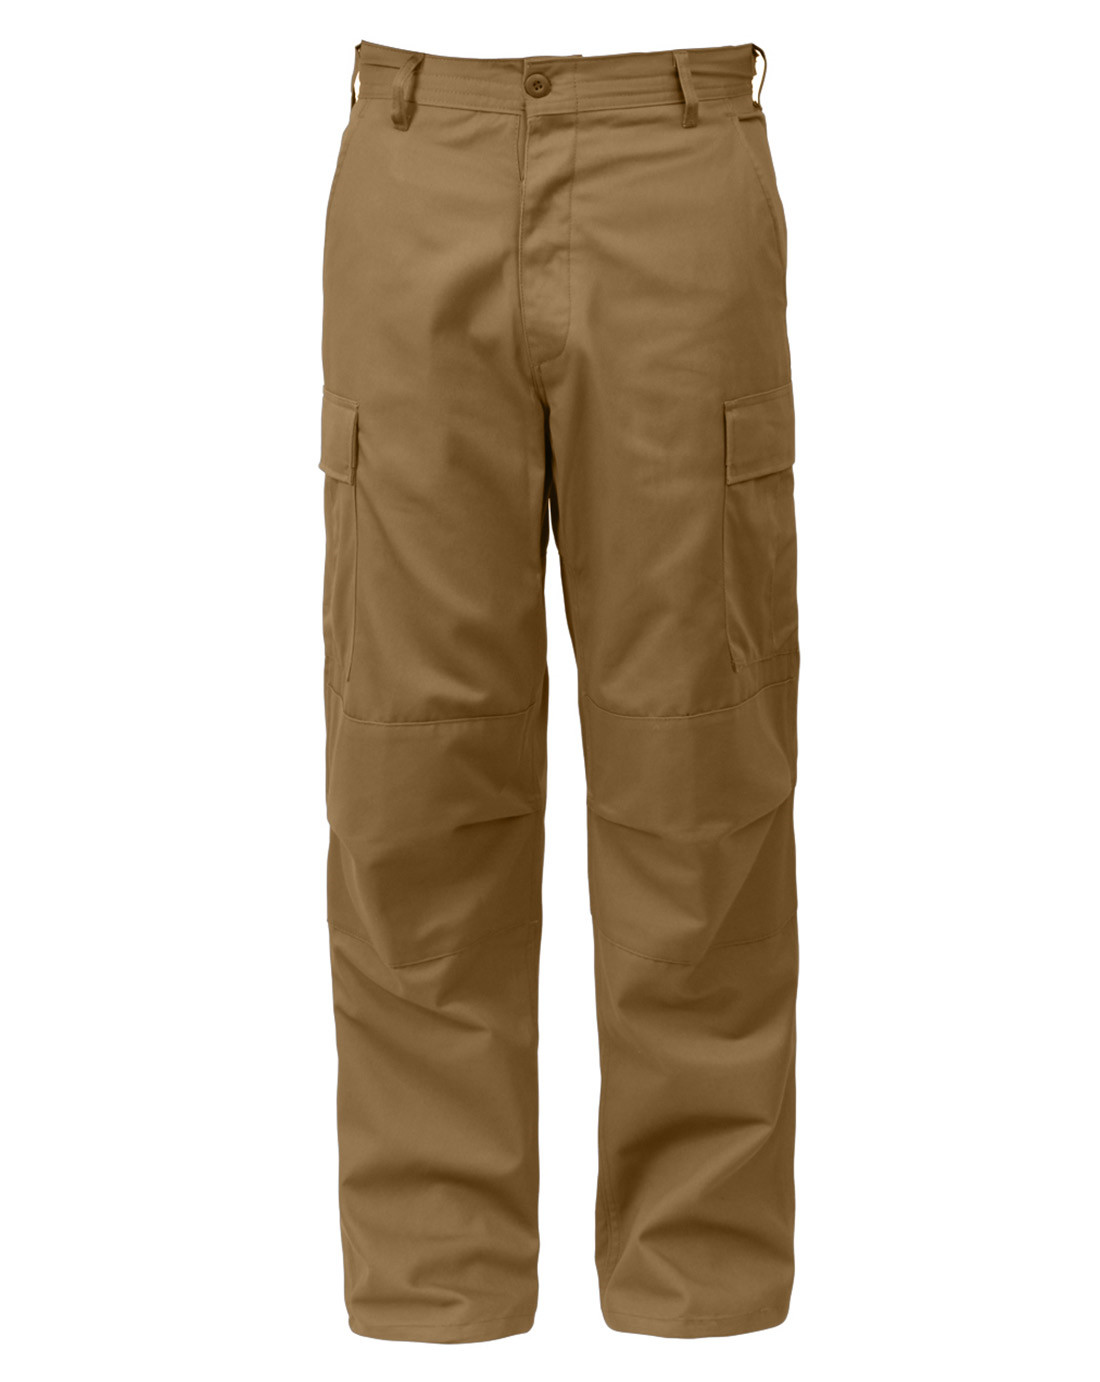 Rothco BDU Bukser - Relaxed Fit (Coyote Brun, Small / 27"-31")